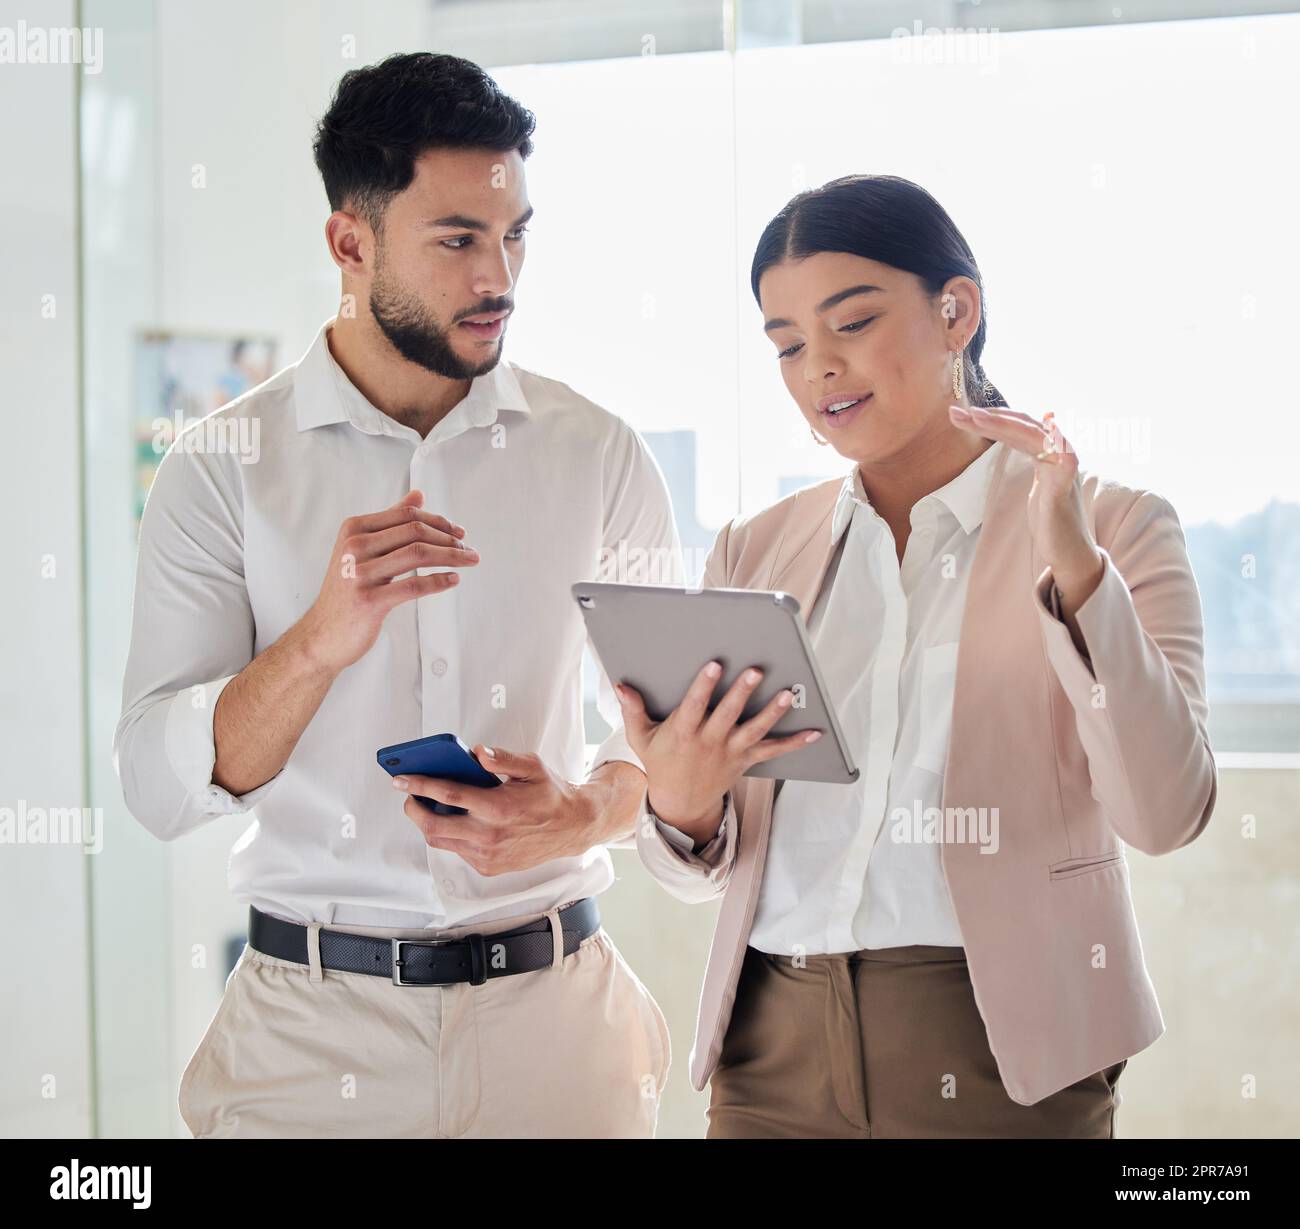 Getting his thoughts. two young businesspeople looking at a tablet while standing in their office. Stock Photo